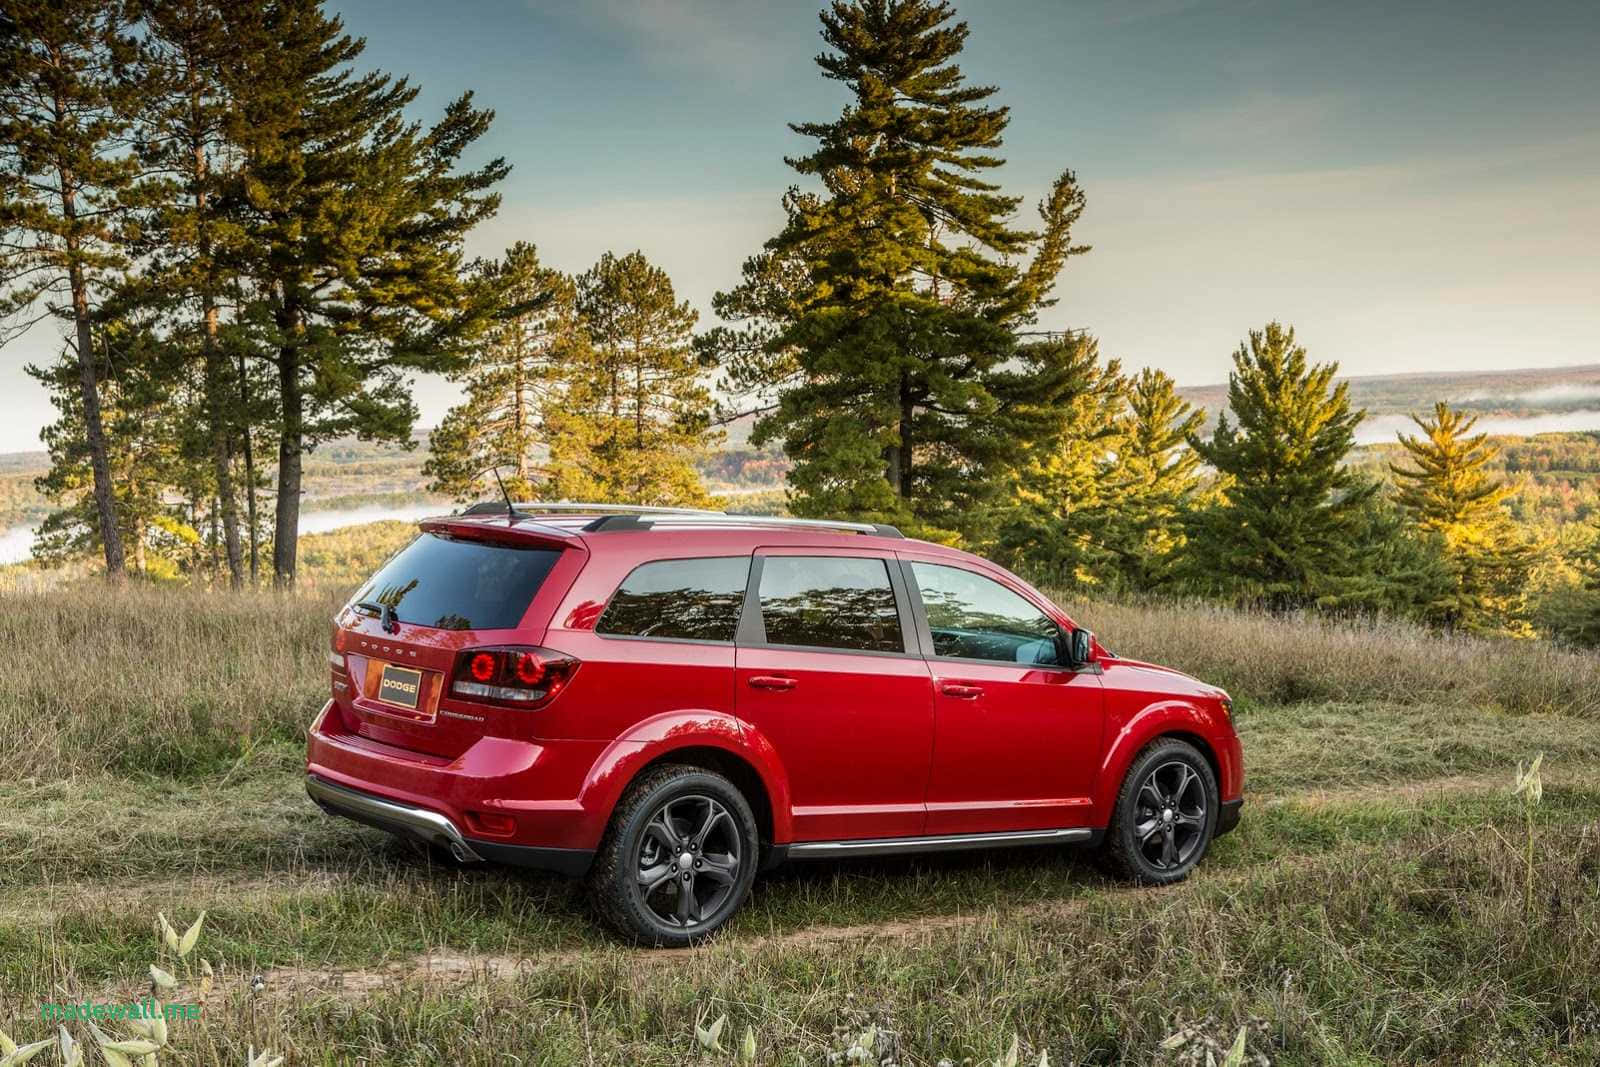 Stunning Dodge Journey Showcasing Perfect Blend Of Style And Performance Wallpaper